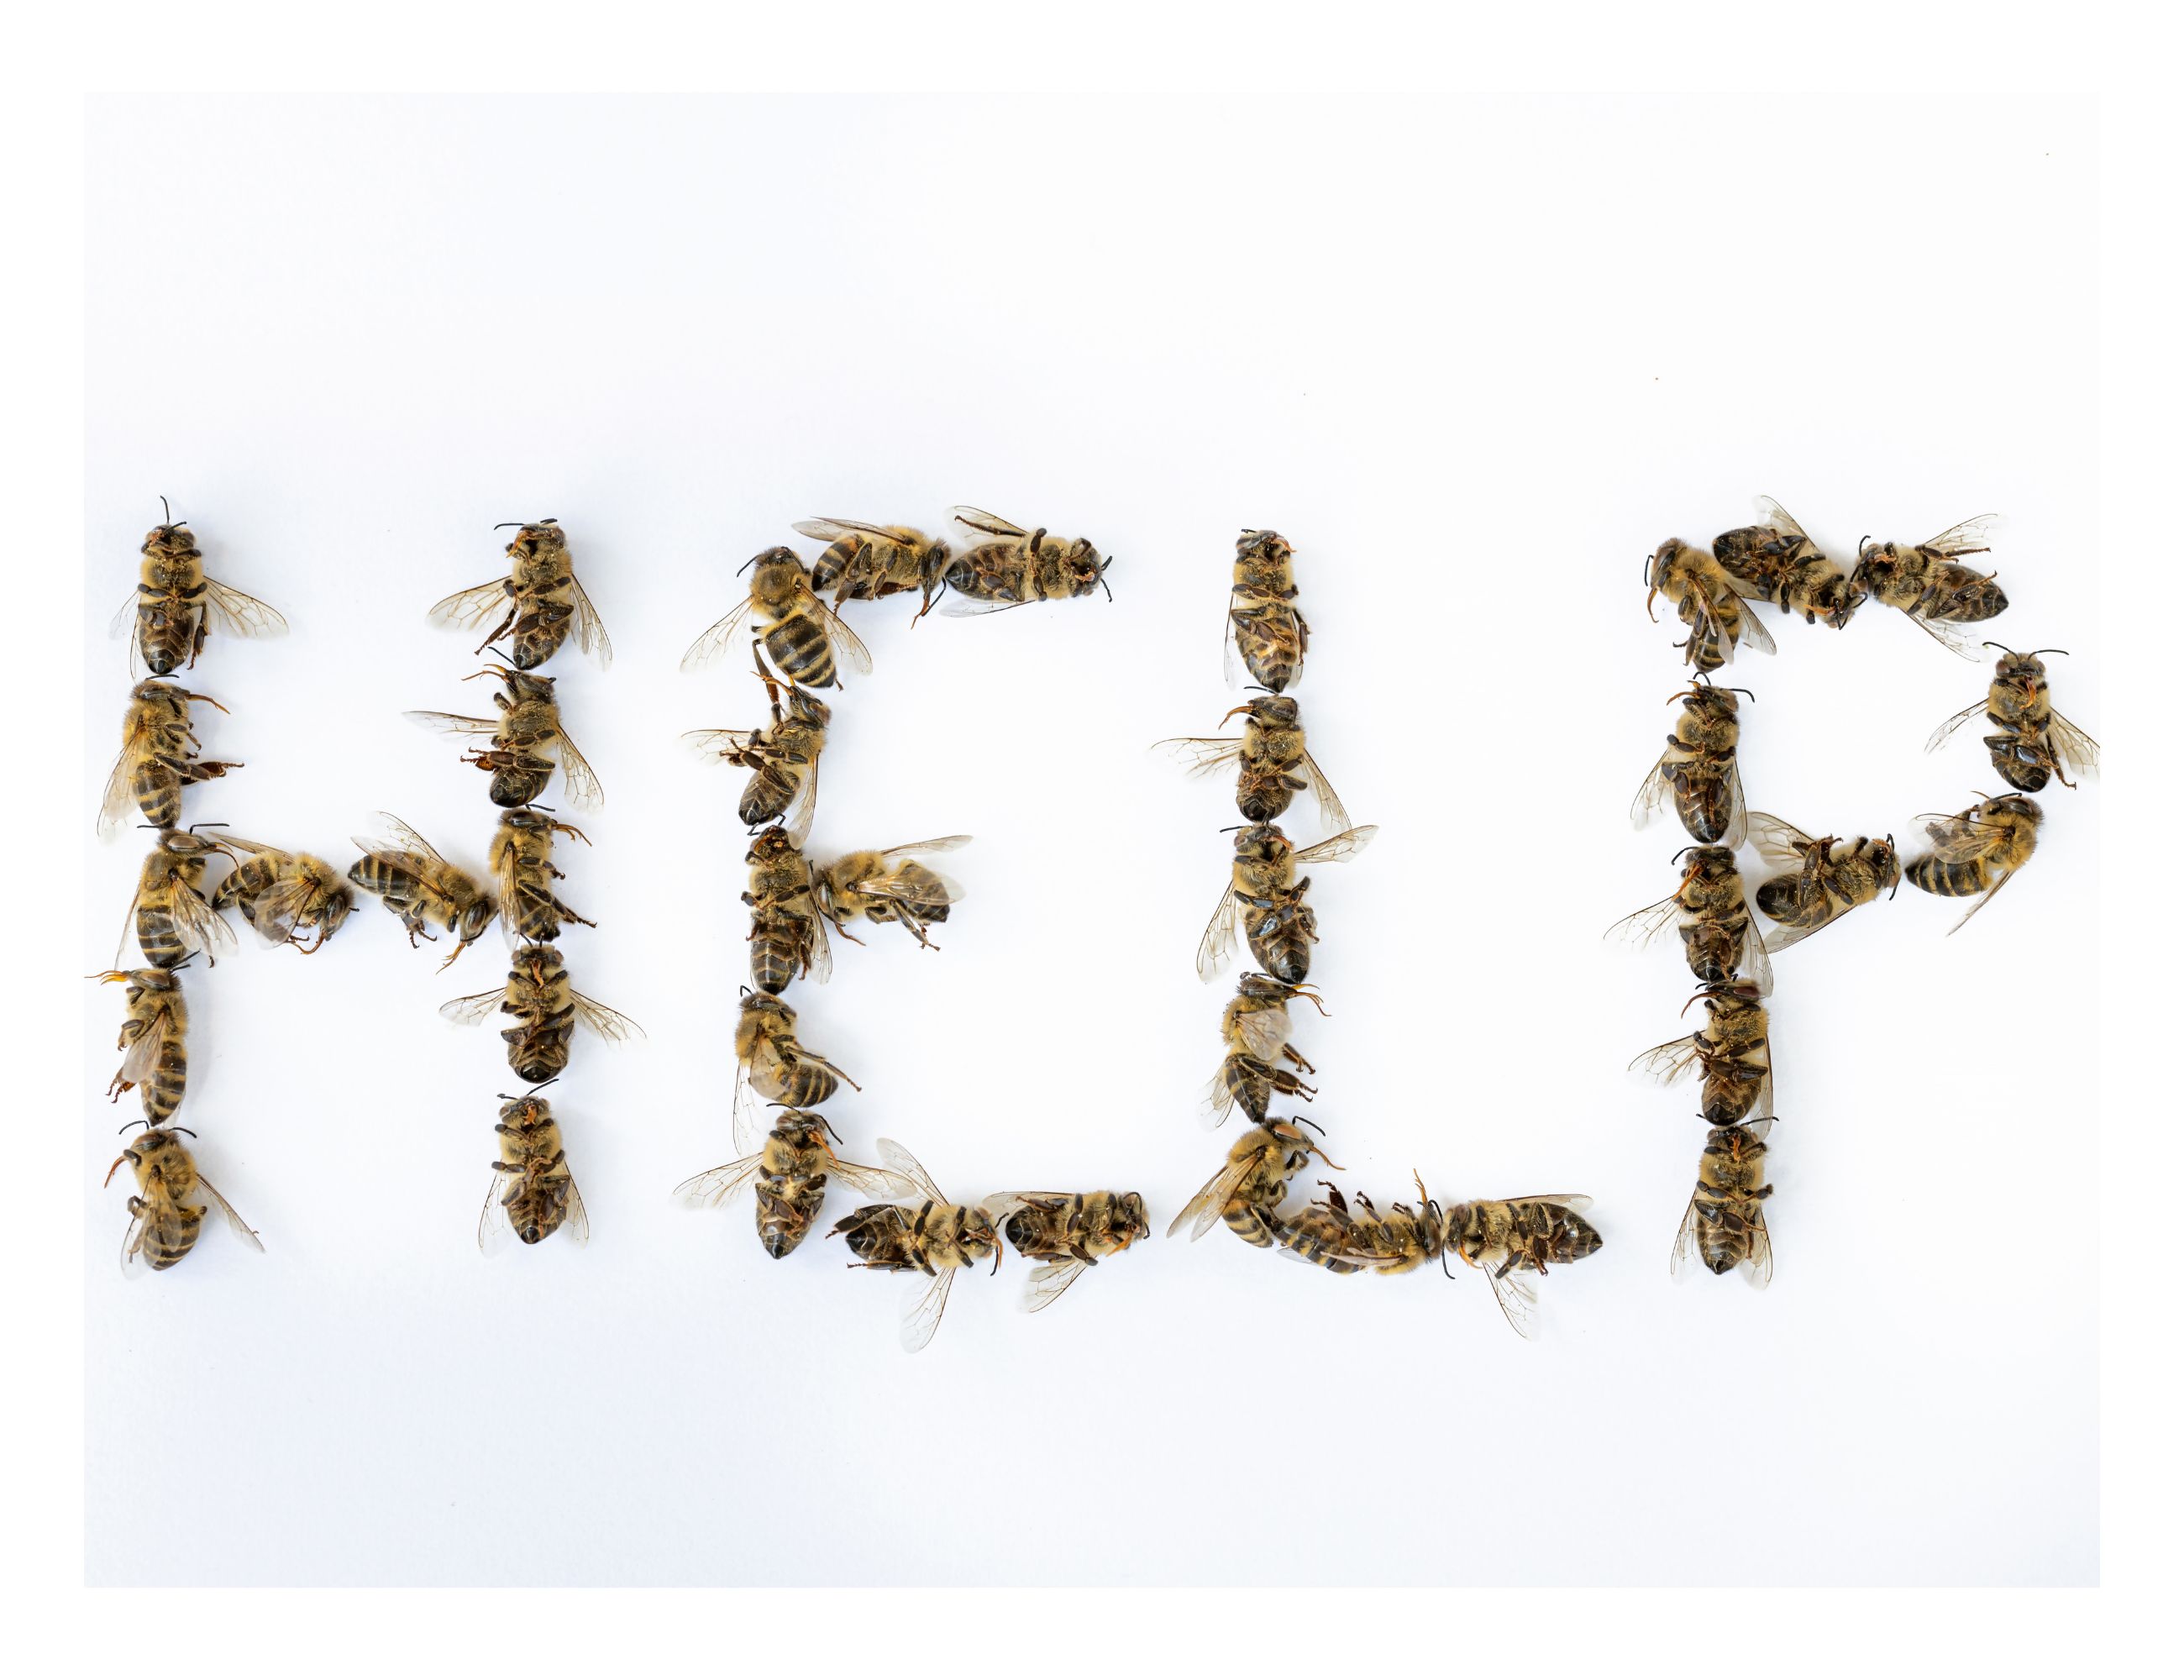 Help Save the Bees